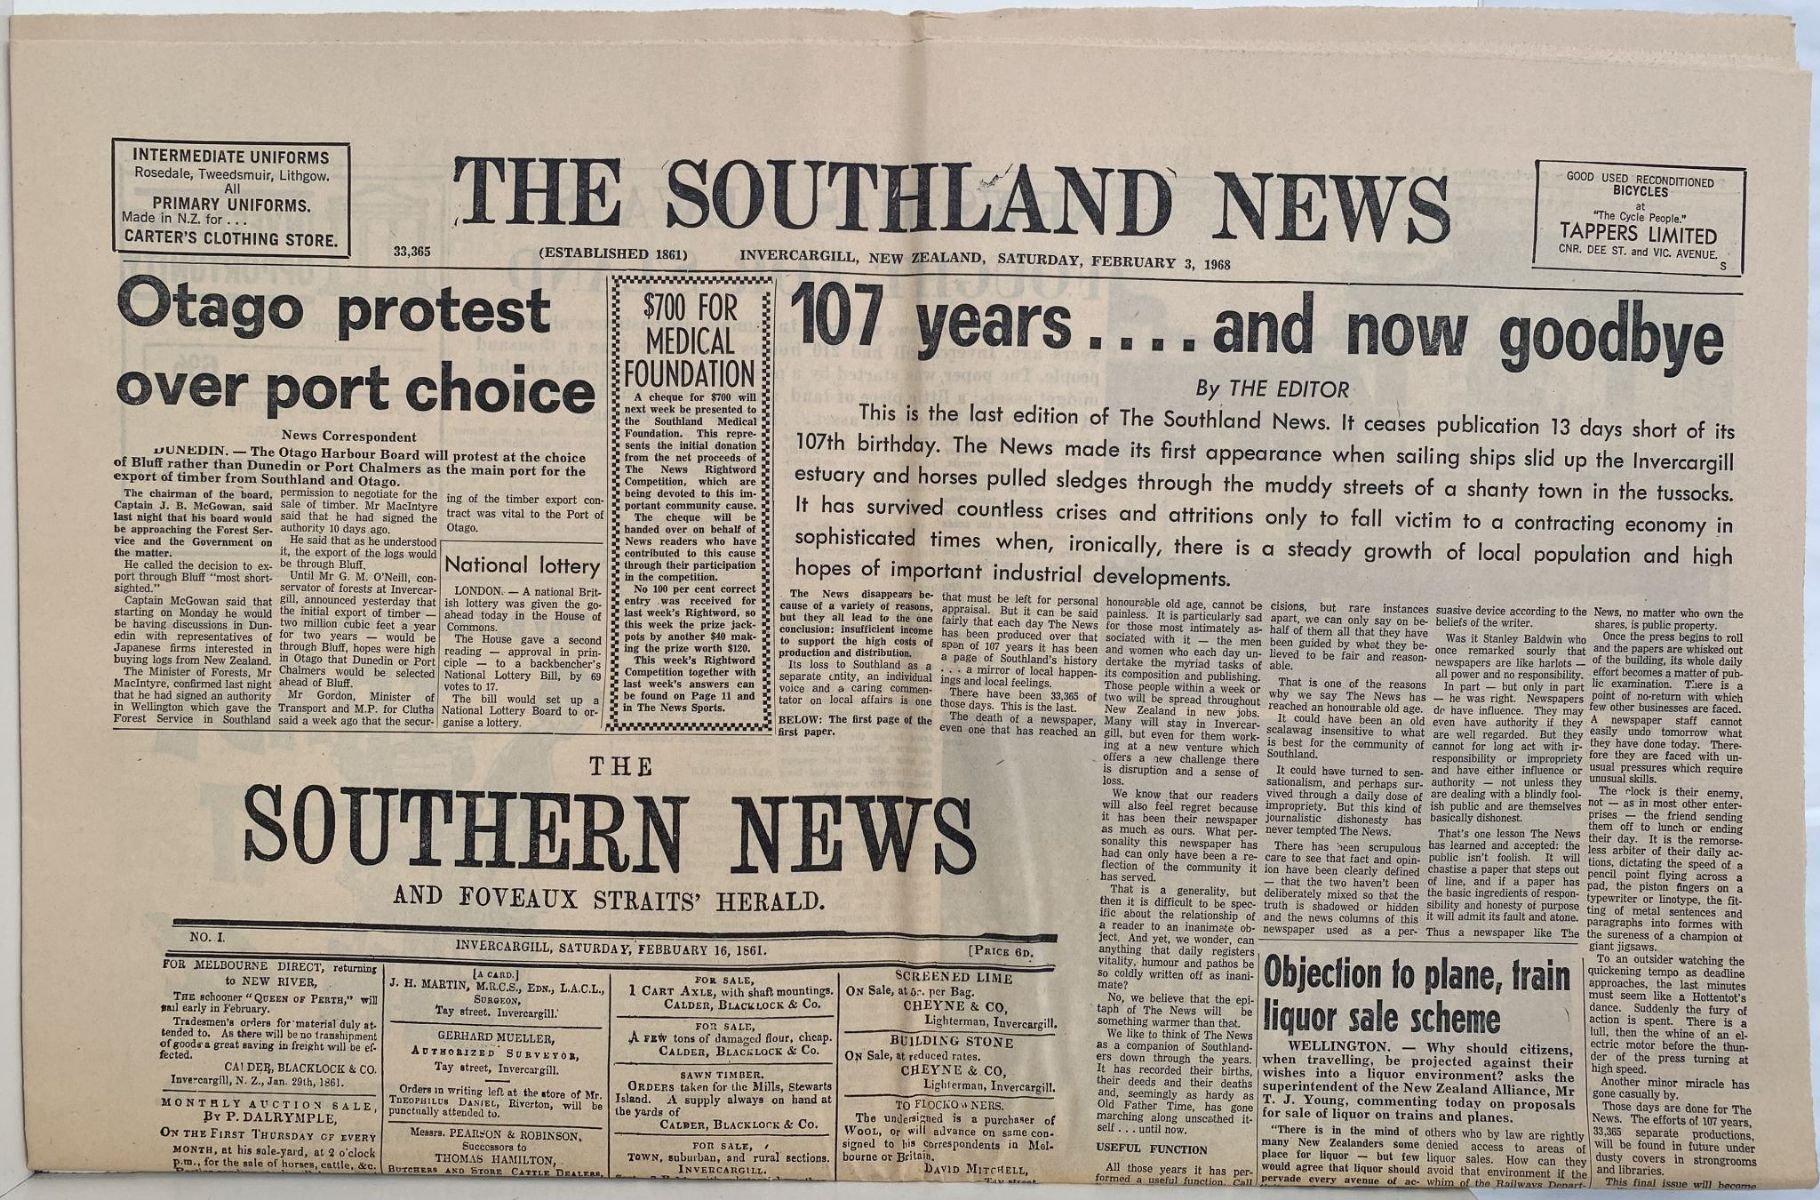 OLD NEWSPAPER: The Southland News, 3 February 1968 - The very last edition